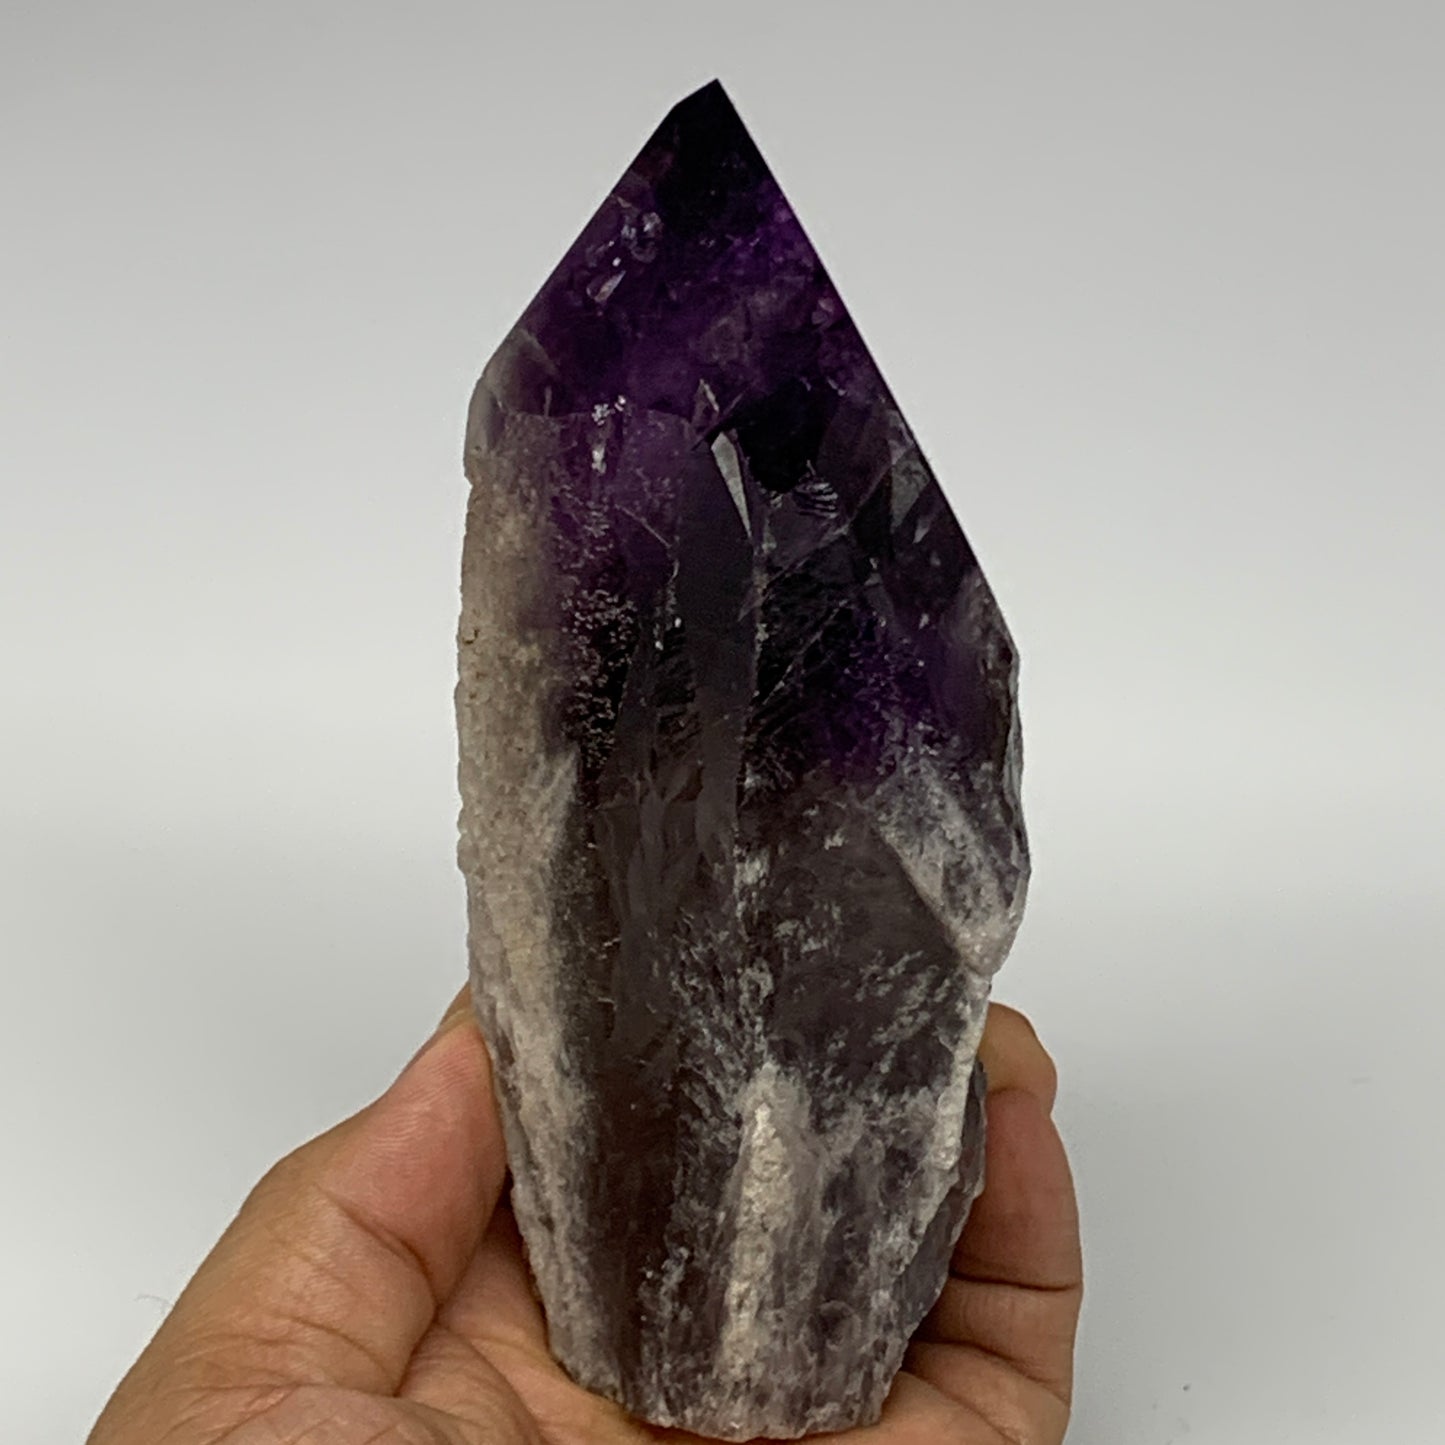 520g,5.1"x2.6"x2.1", Amethyst Point Polished Rough lower part Stands, B19065